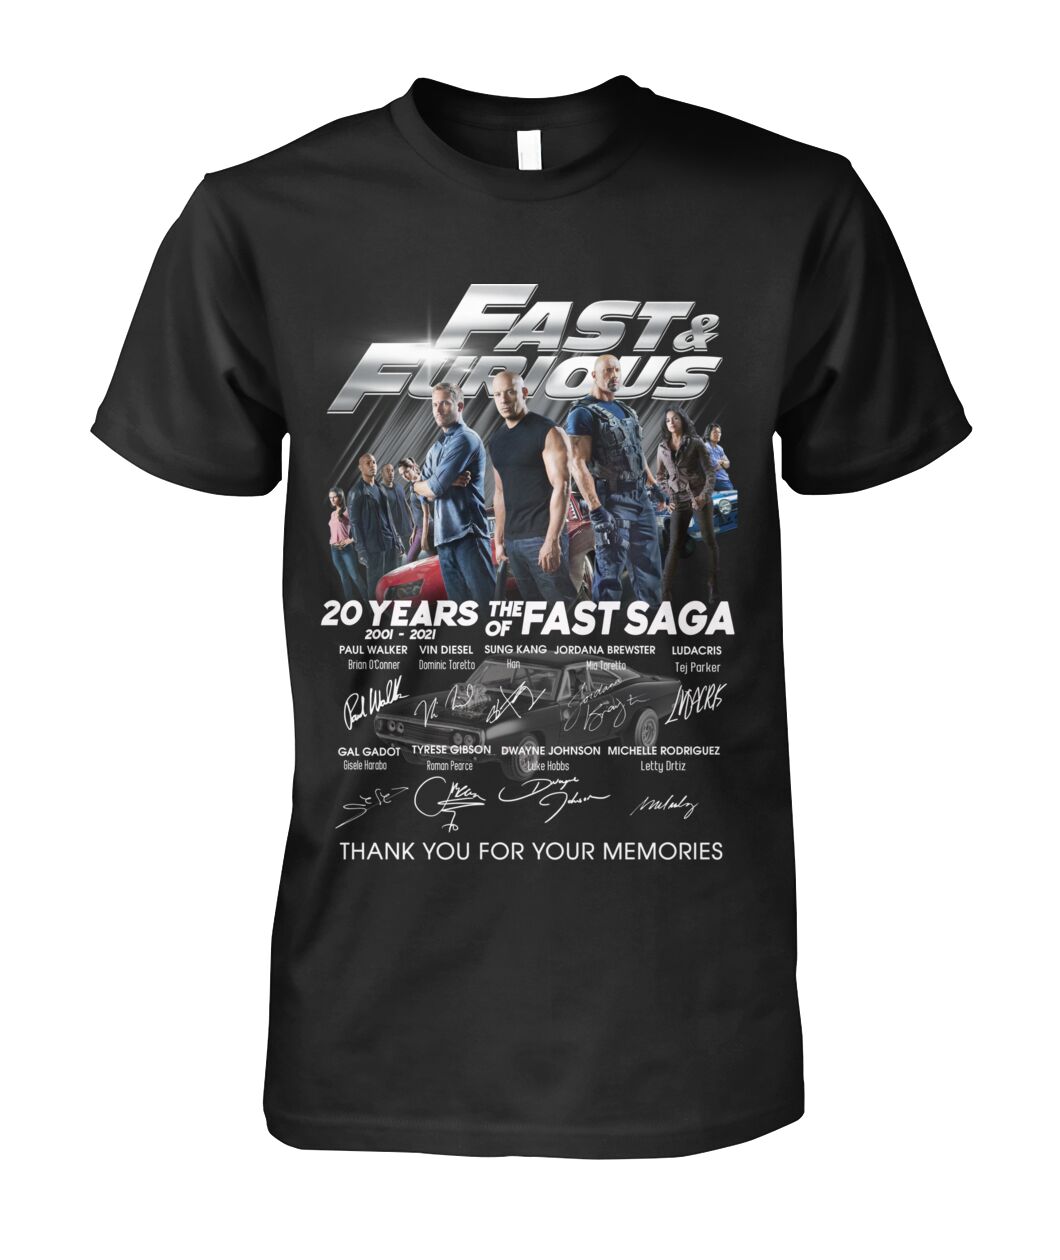 Fast and furious 20 years of the fast saga signature shirt